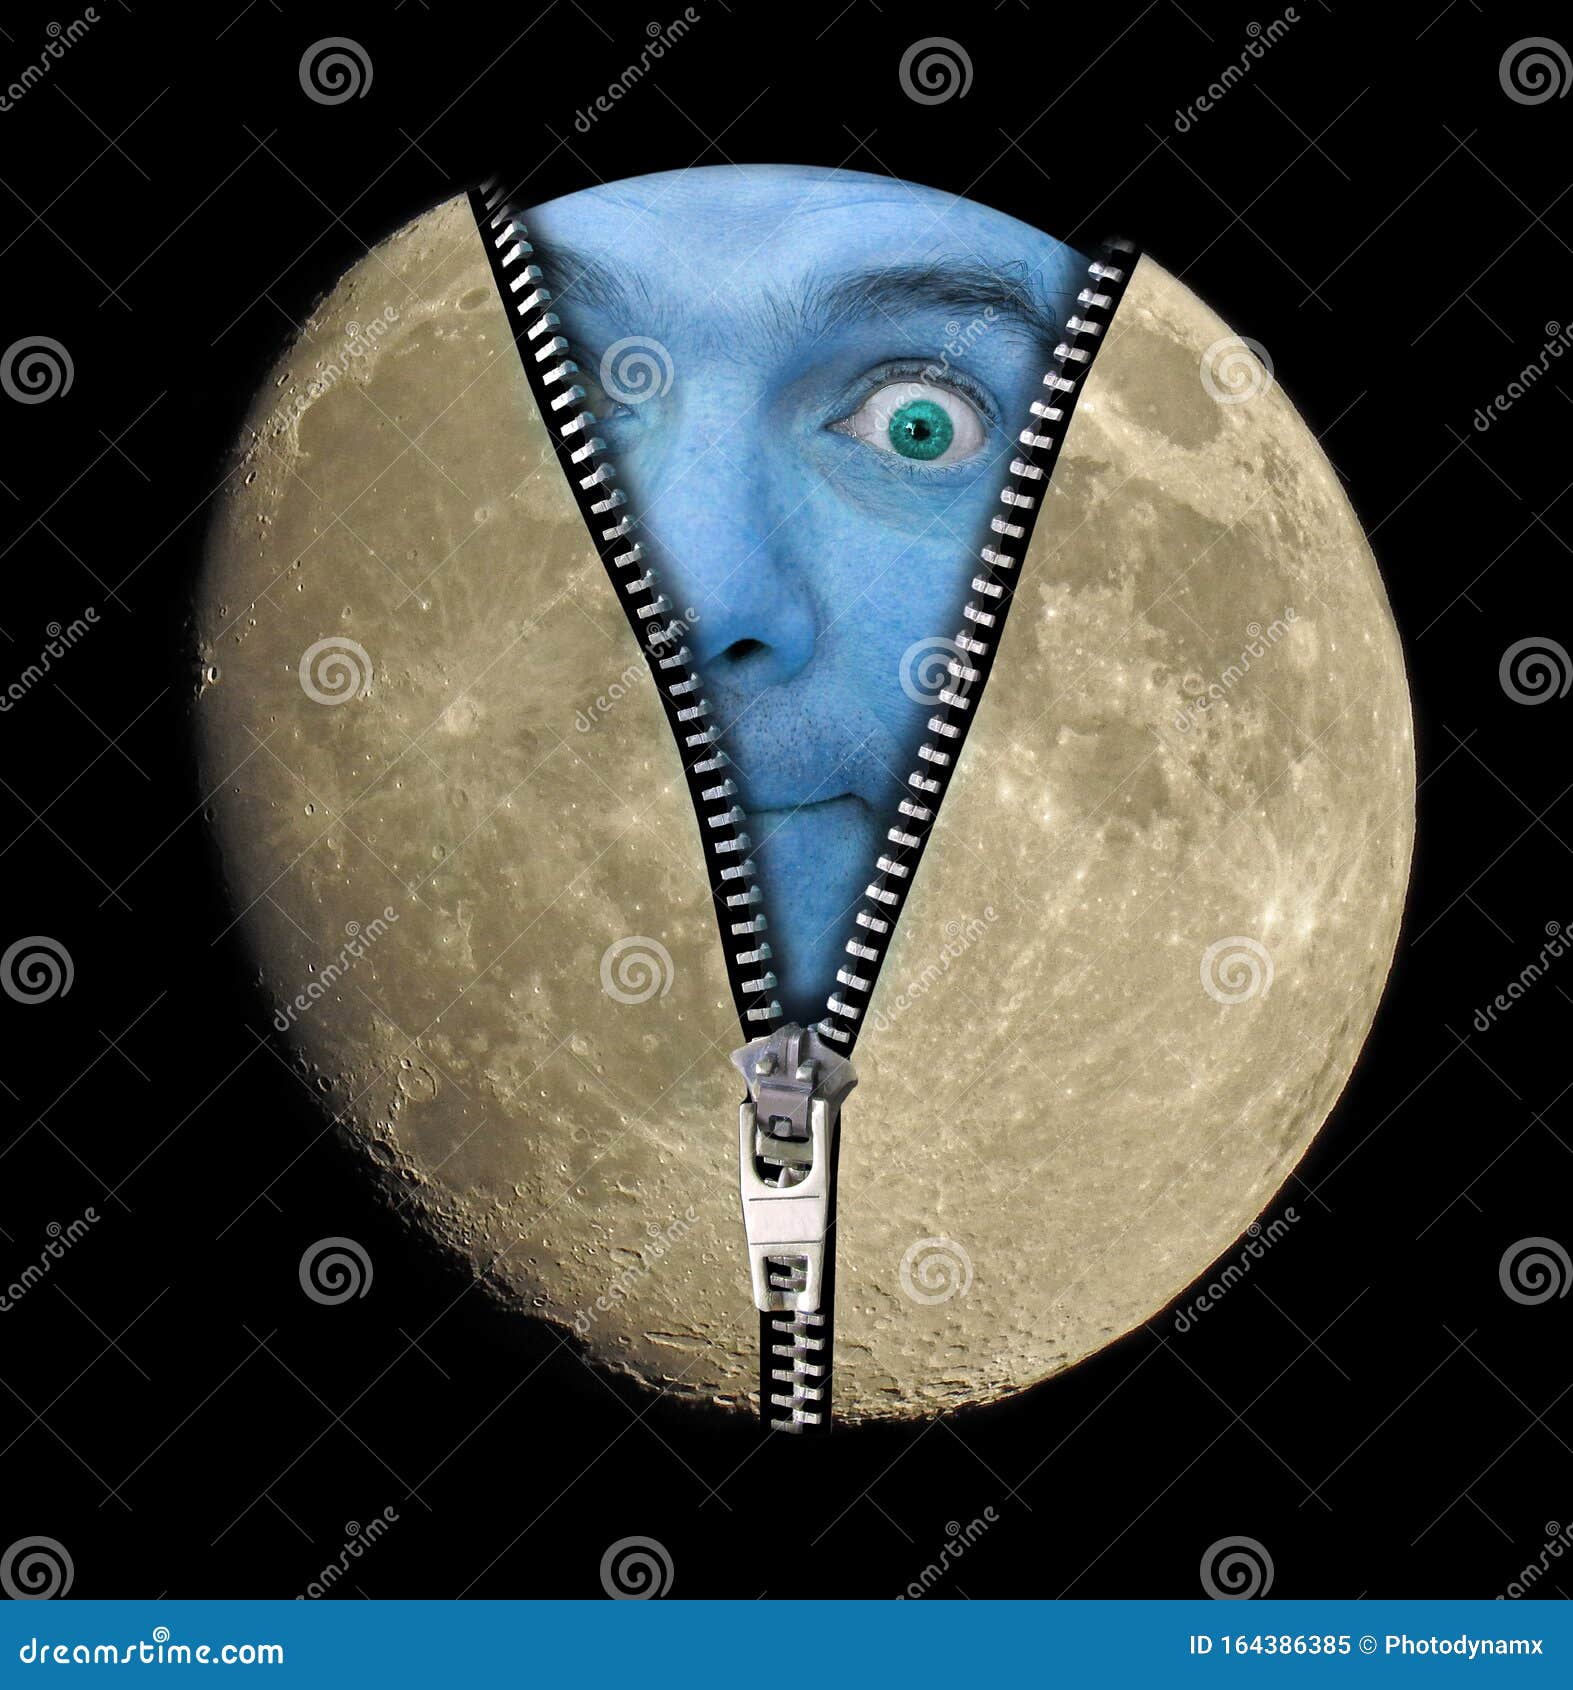 Moon face reveal